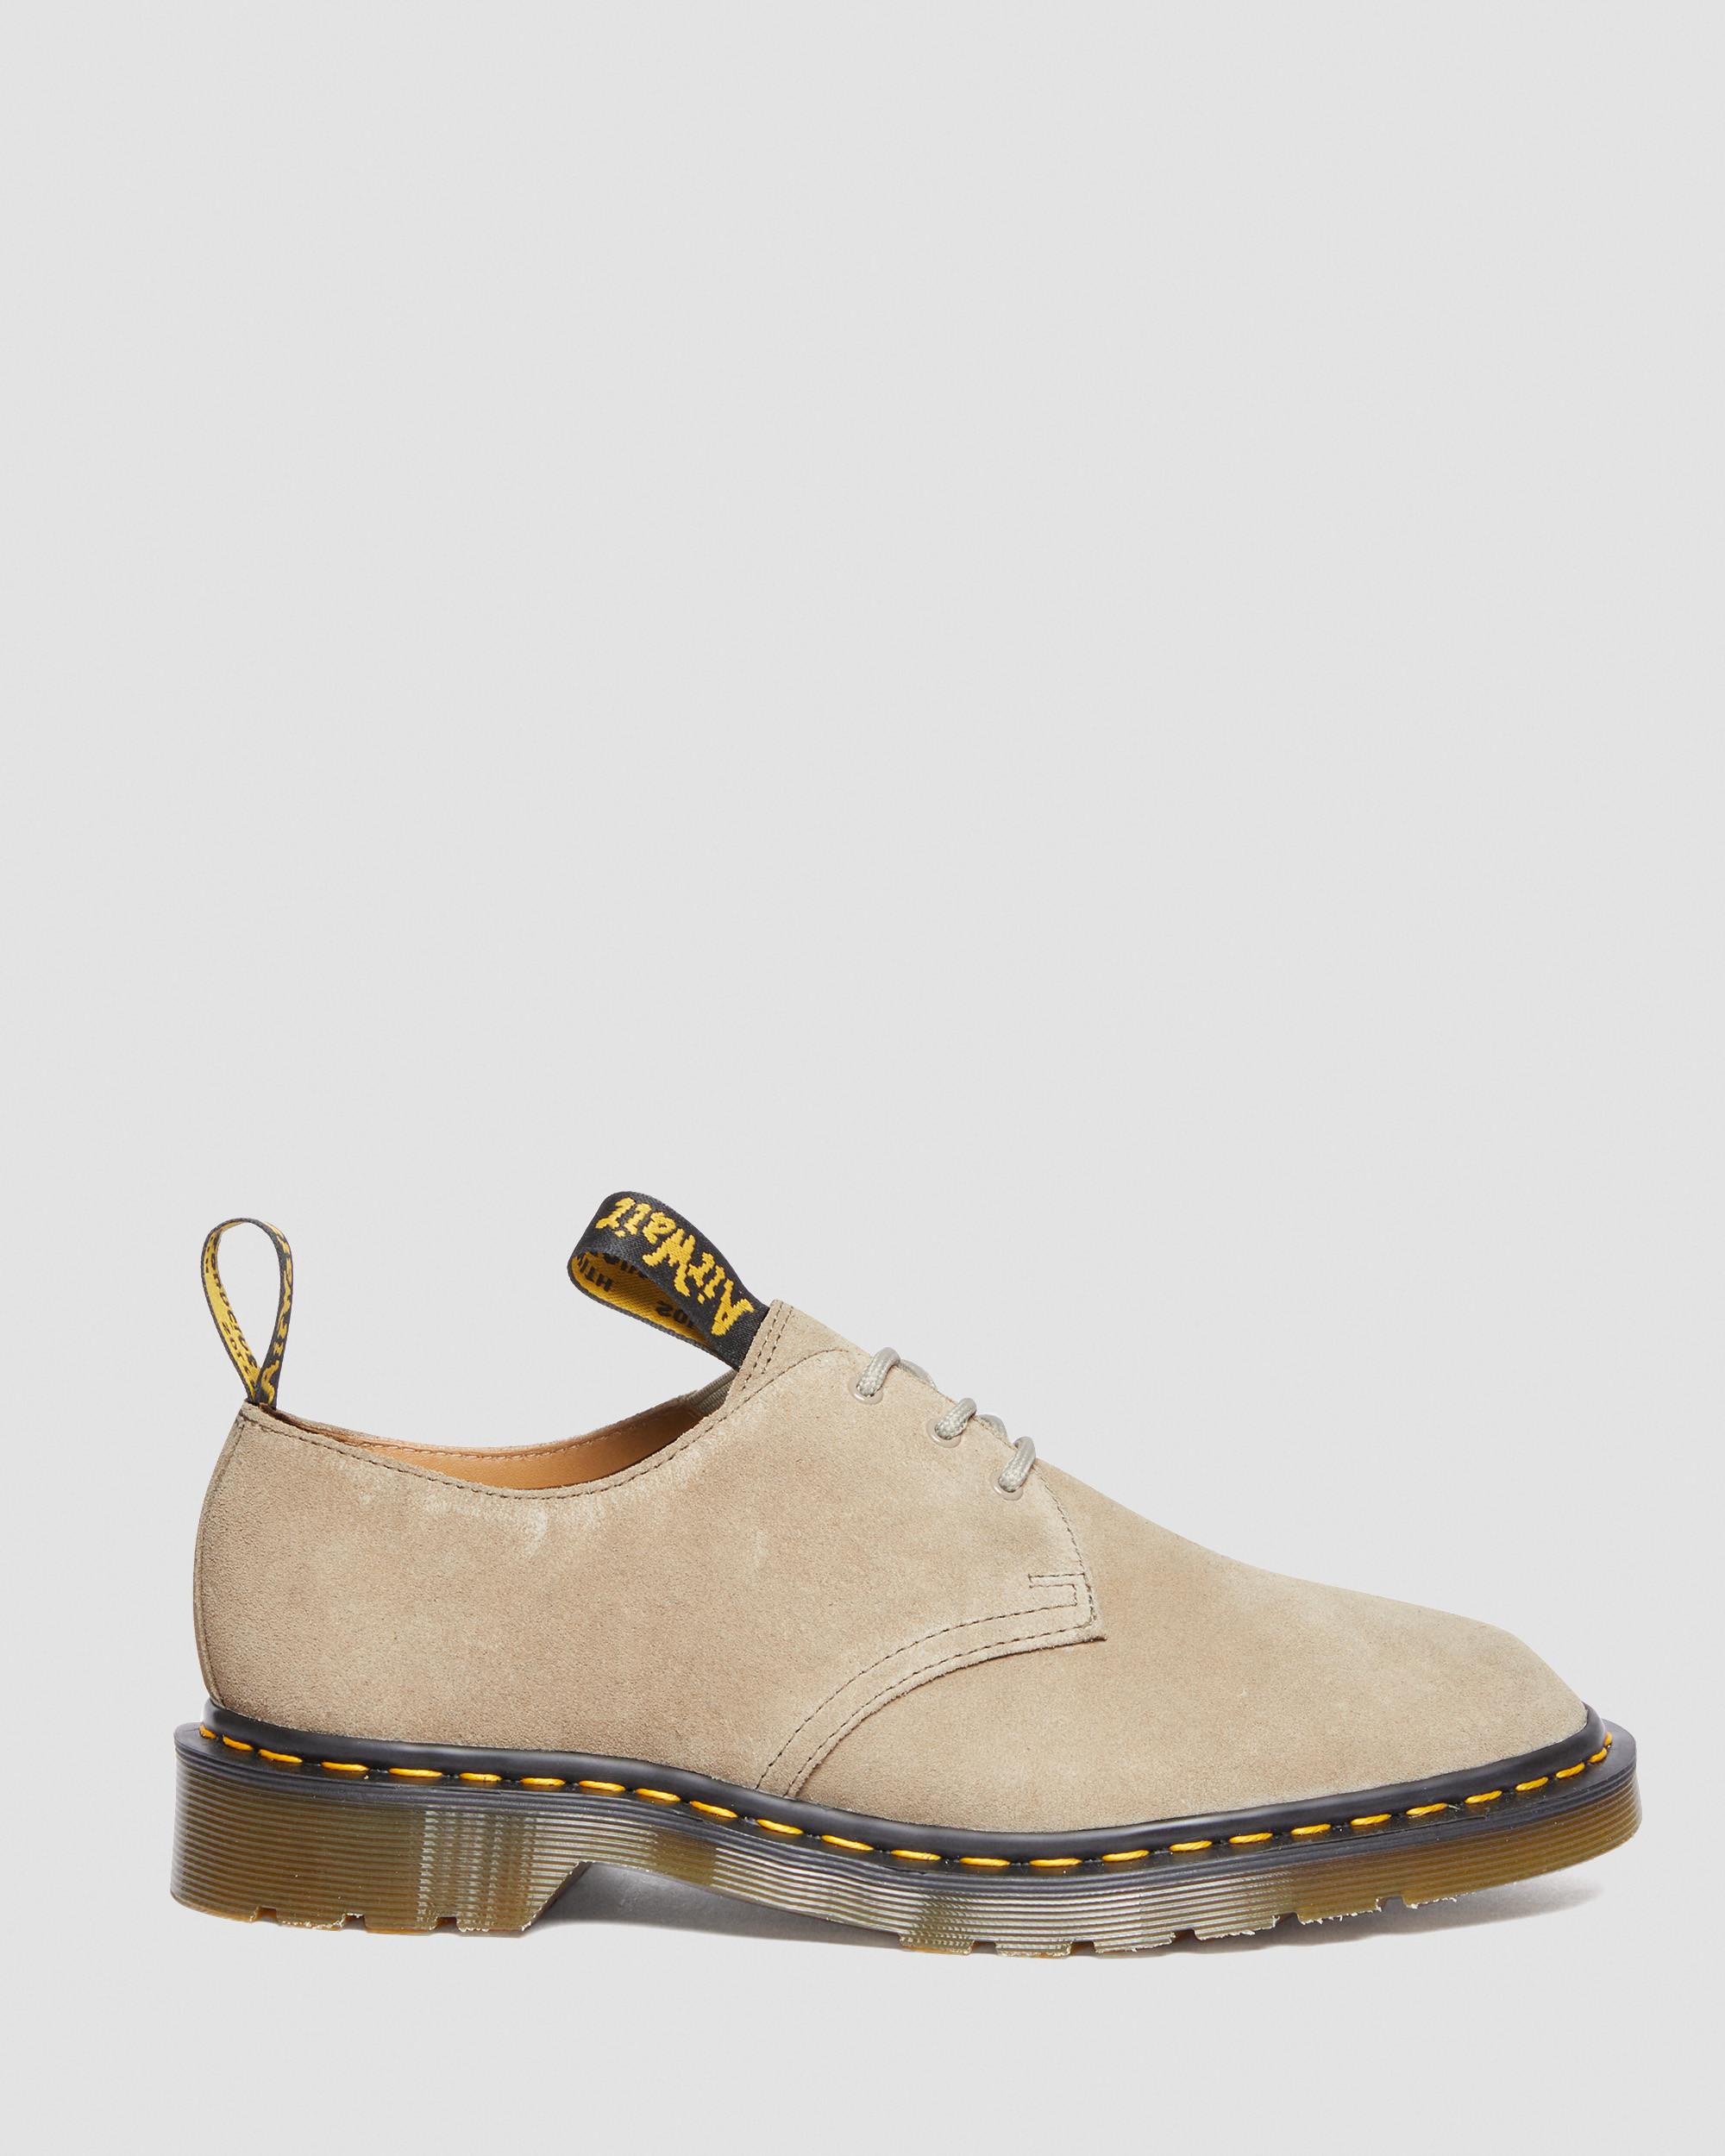 DR MARTENS 1461 Engineered Garments Suede Oxford Shoes